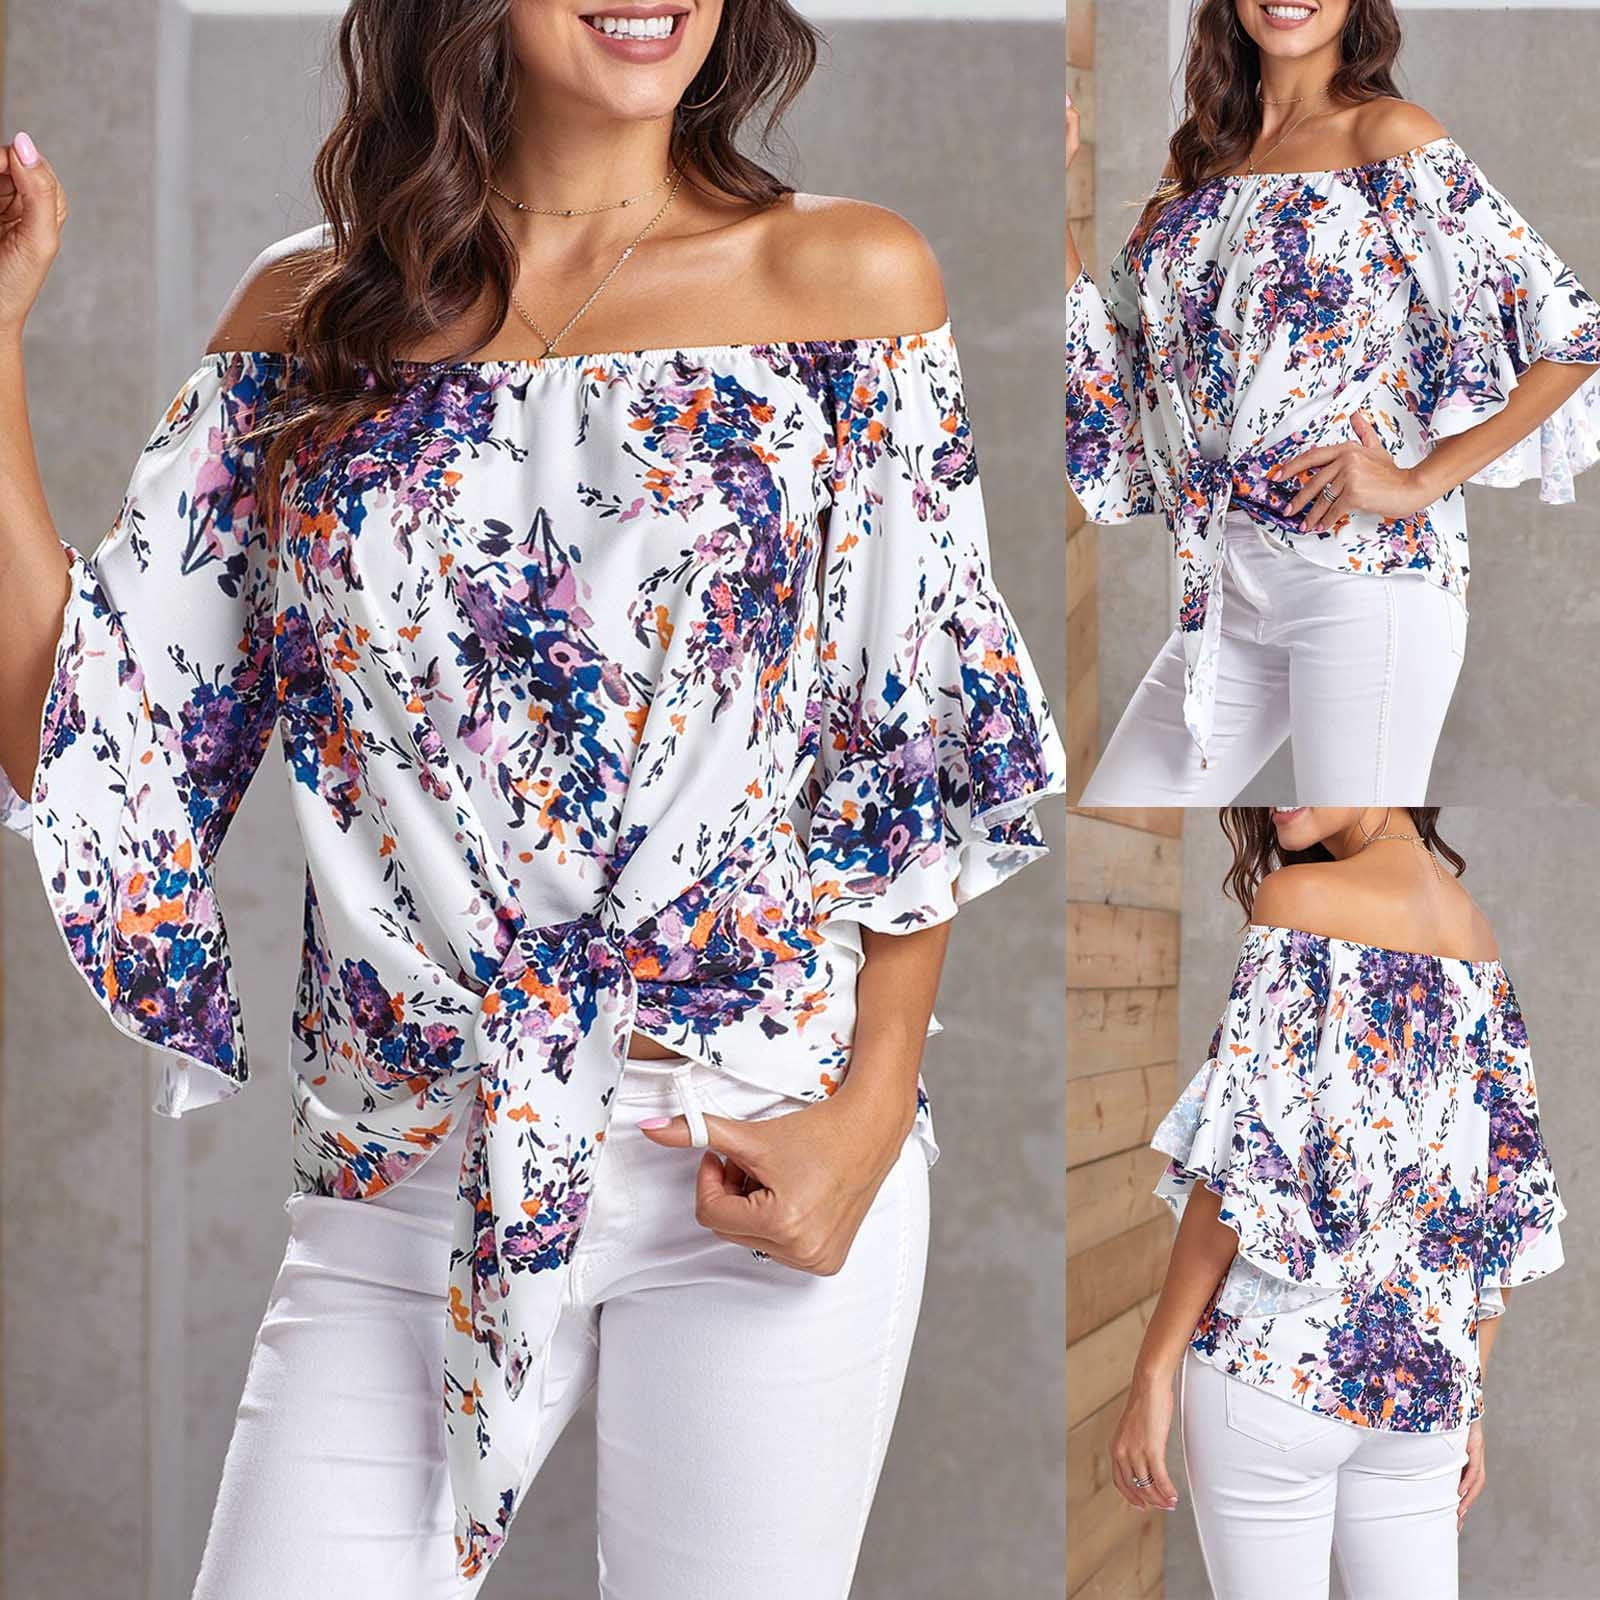 Reskyd ved godt Supersonic hastighed Xysaqa Shirts For Women Party Tops For Women Off The Shoulder Tops For  Women Short Sleeve Printed Blouse Tops Clothes T Shirt Party Tops For Women  On Clearance - Walmart.com